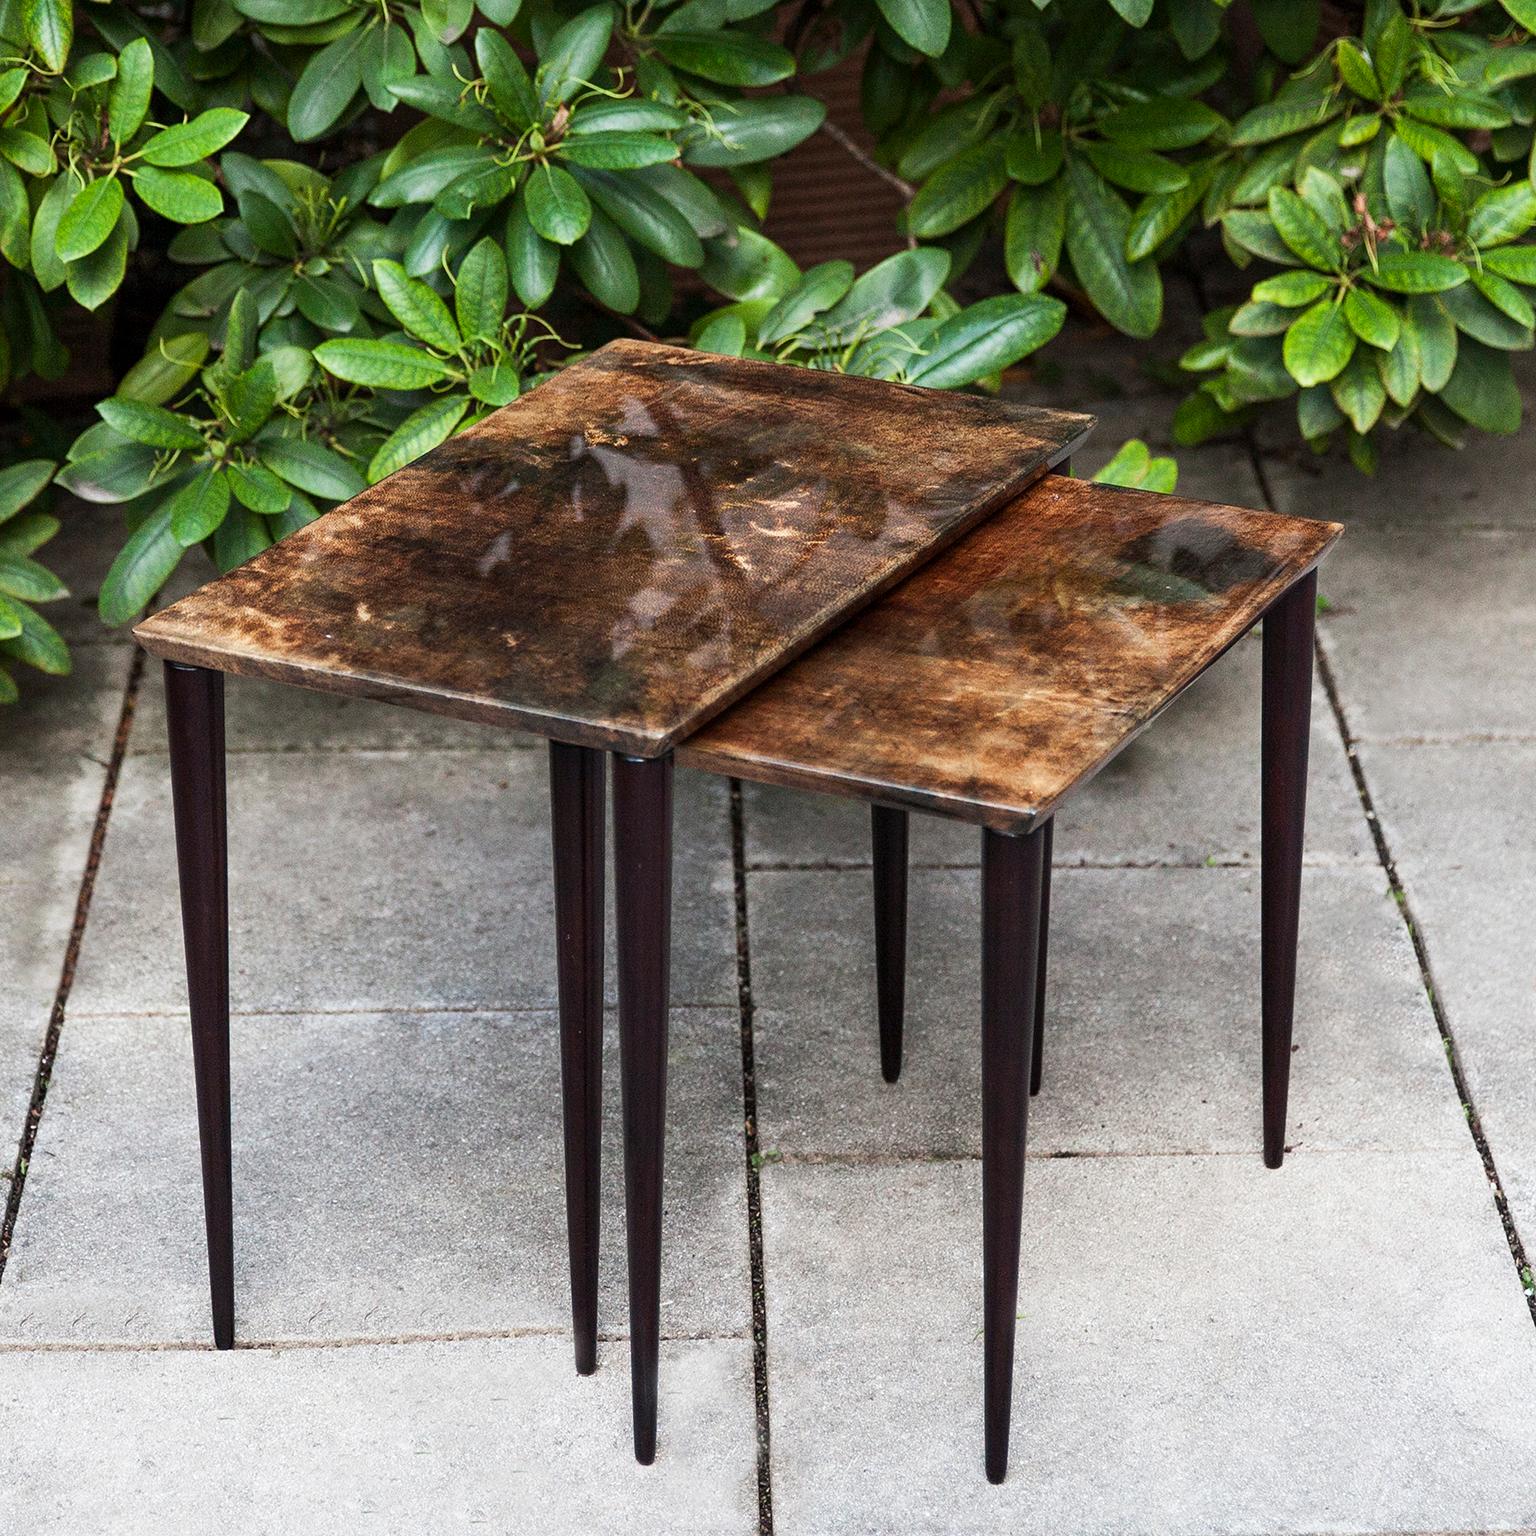 Set of two Aldo Tura nesting tables in lacquered brown goatskin and mahogany legs. This particular set was executed, circa 1960 and is in perfect condition. Along with artists like Piero Fornasetti and Carlo Bugatti, Aldo Tura (1909-1963) definitely